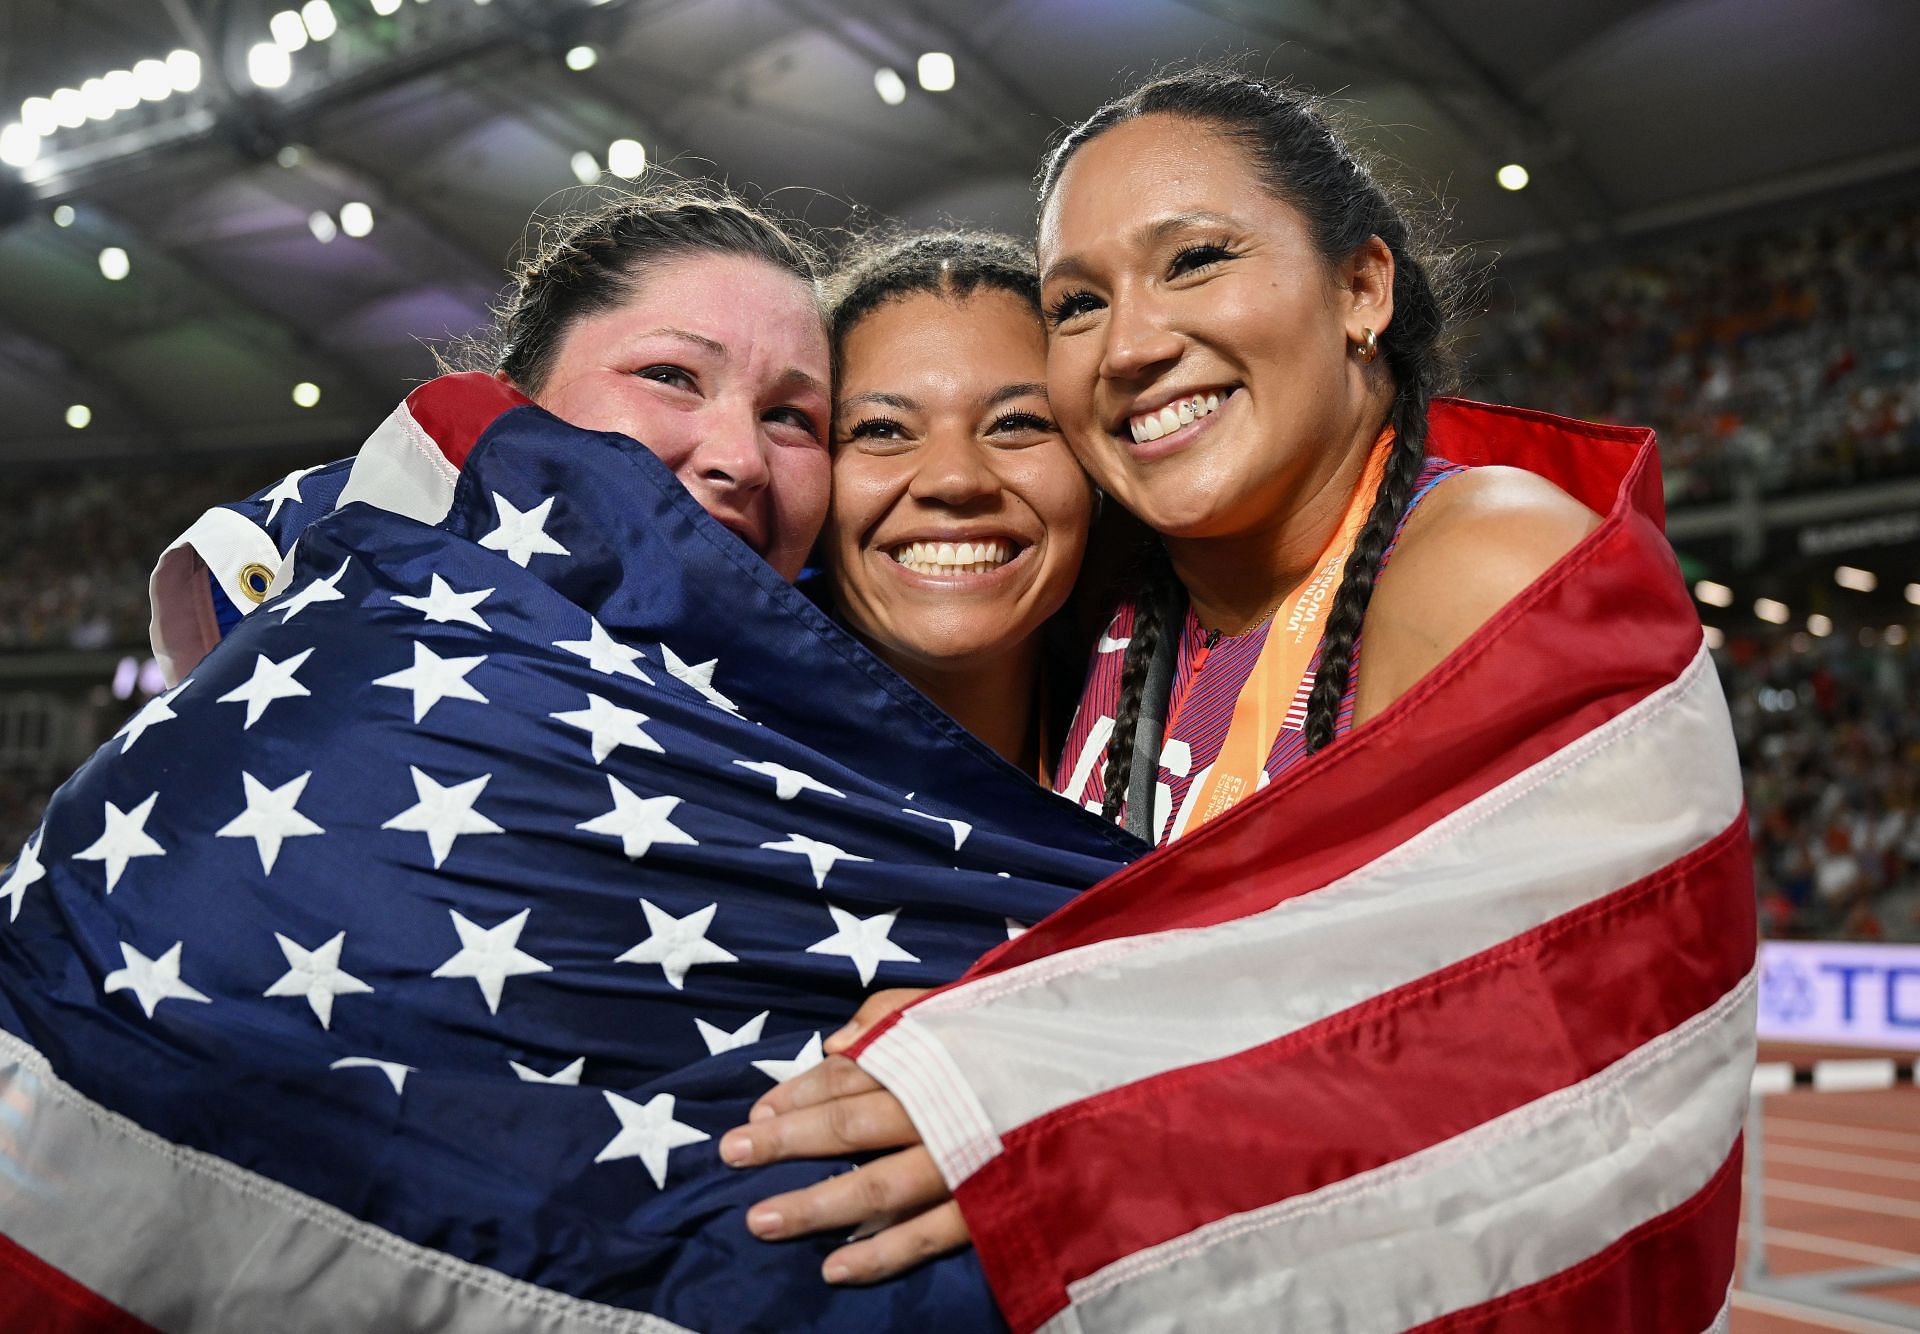 Bronze medalist Deanna Price of Team United States, gold medalist Camryn Rogers of Team Canada and silver medalist Janee&#039; Kassanavoid of Team United States react after winning the Women&#039;s Hammer Throw Final during Day 6 of the World Athletics Championships Budapest 2023